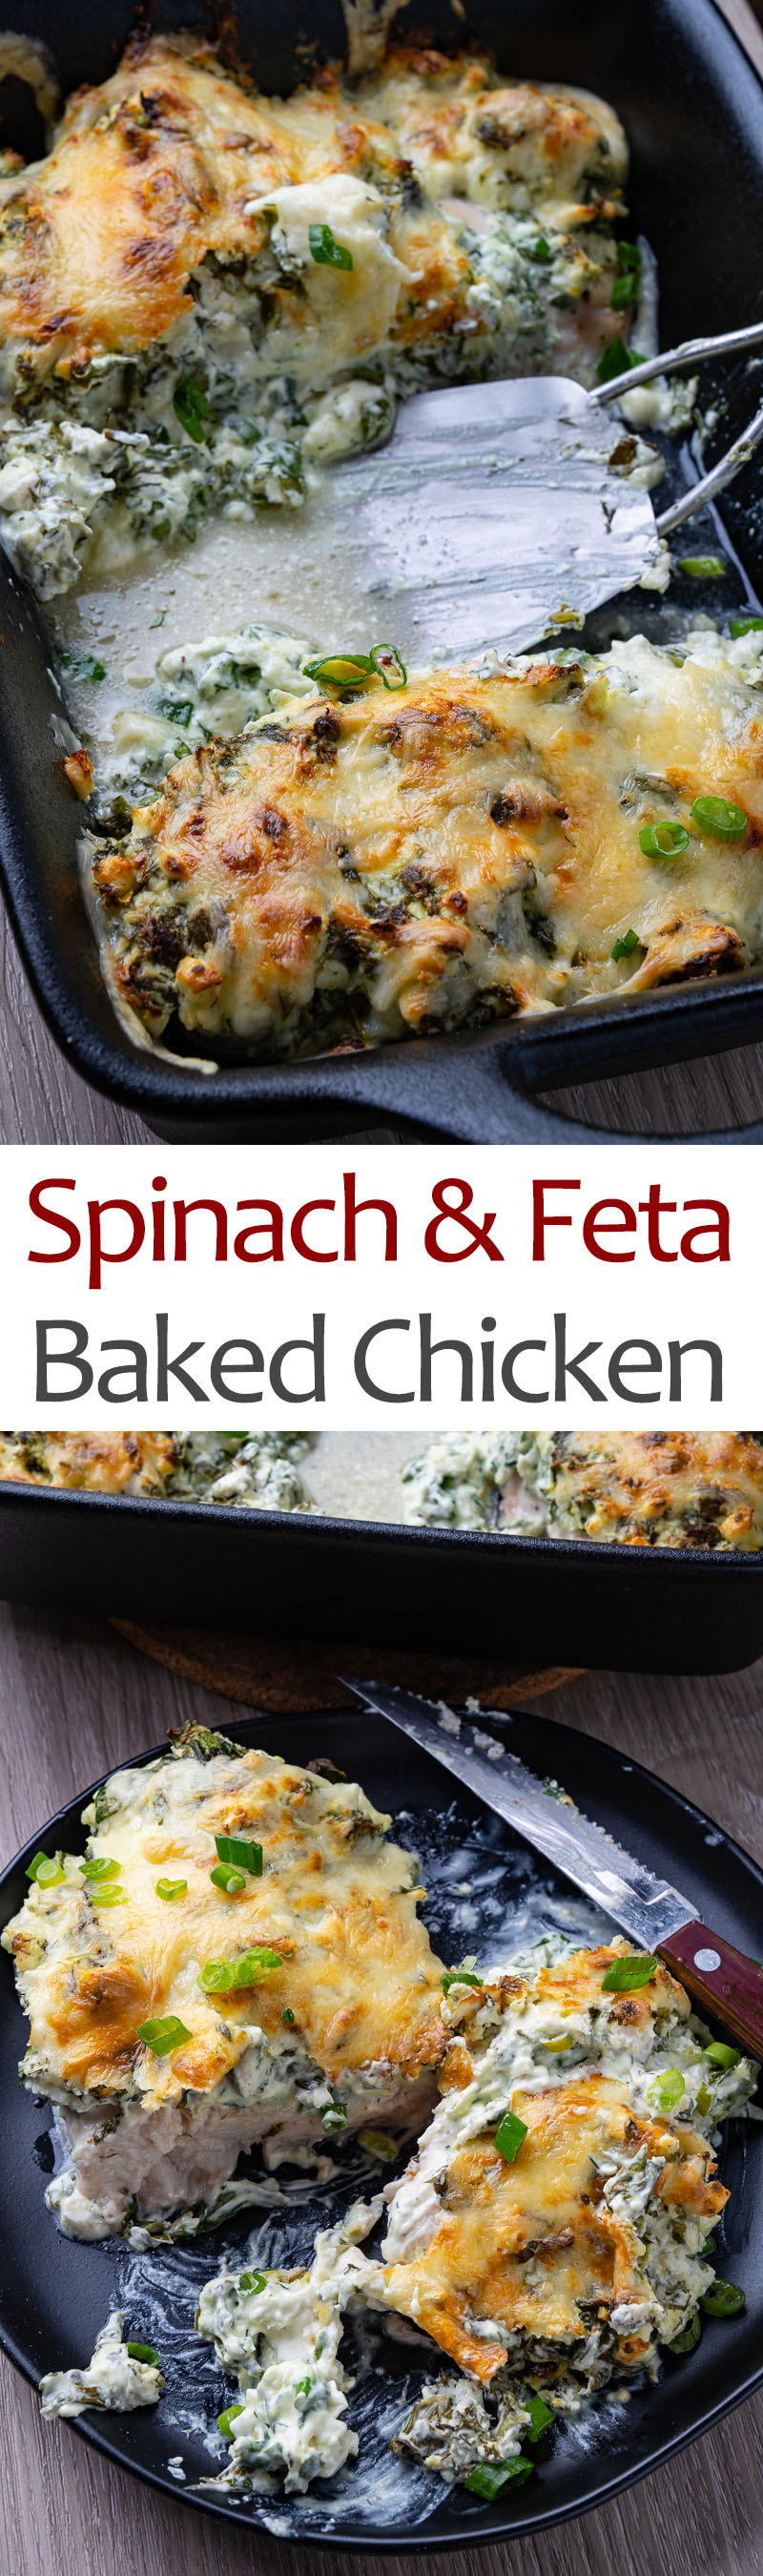 Spinach and Feta Baked Chicken